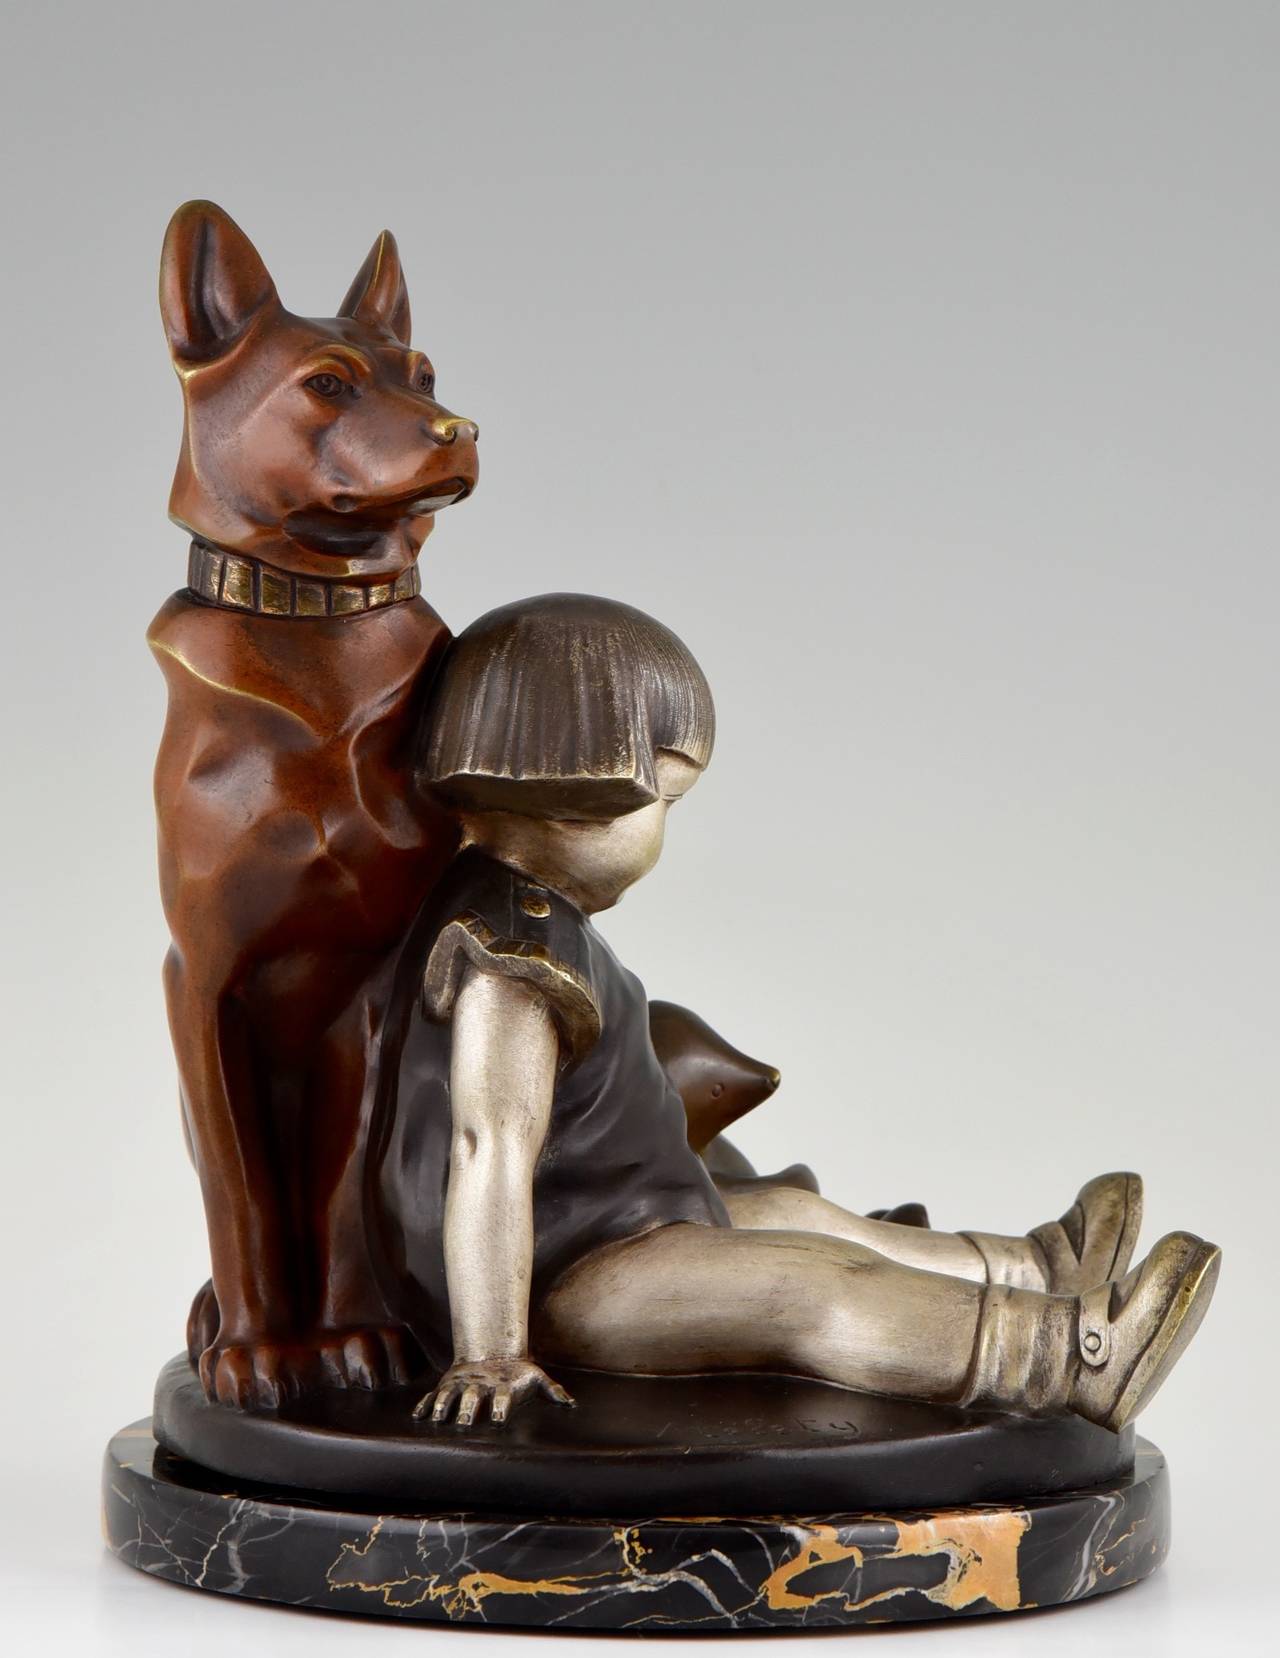 French Art Deco Brone Sculpture Girl with Dog and Teddybear by Kelety 1